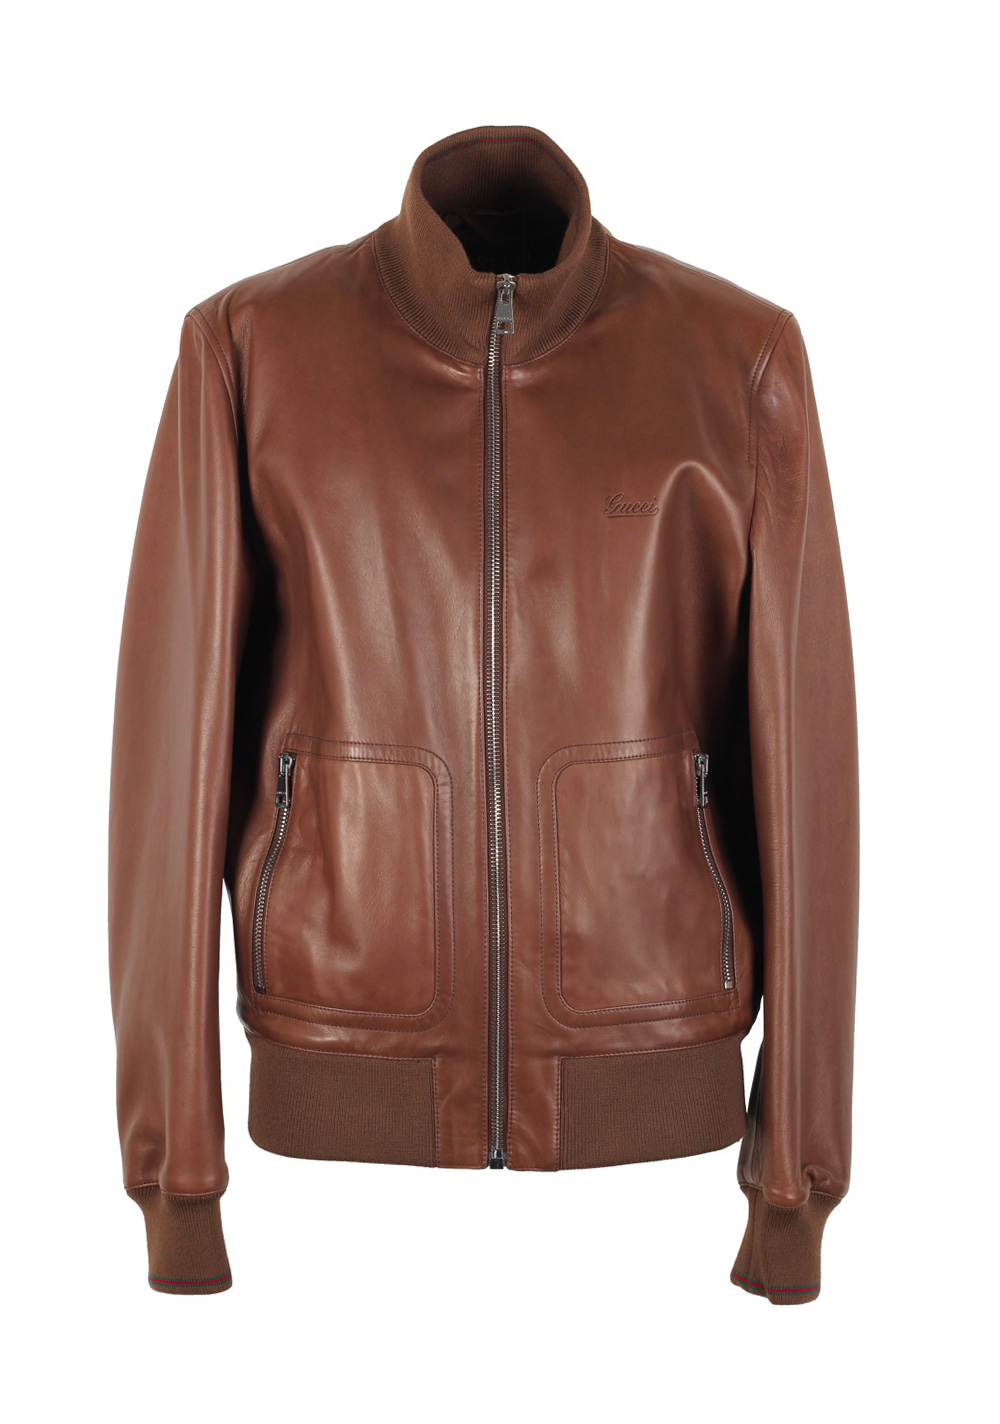 Gucci Brown Nappa Leather Bomber Jacket Coat Size 58 / 48R U.S. | Costume Limité